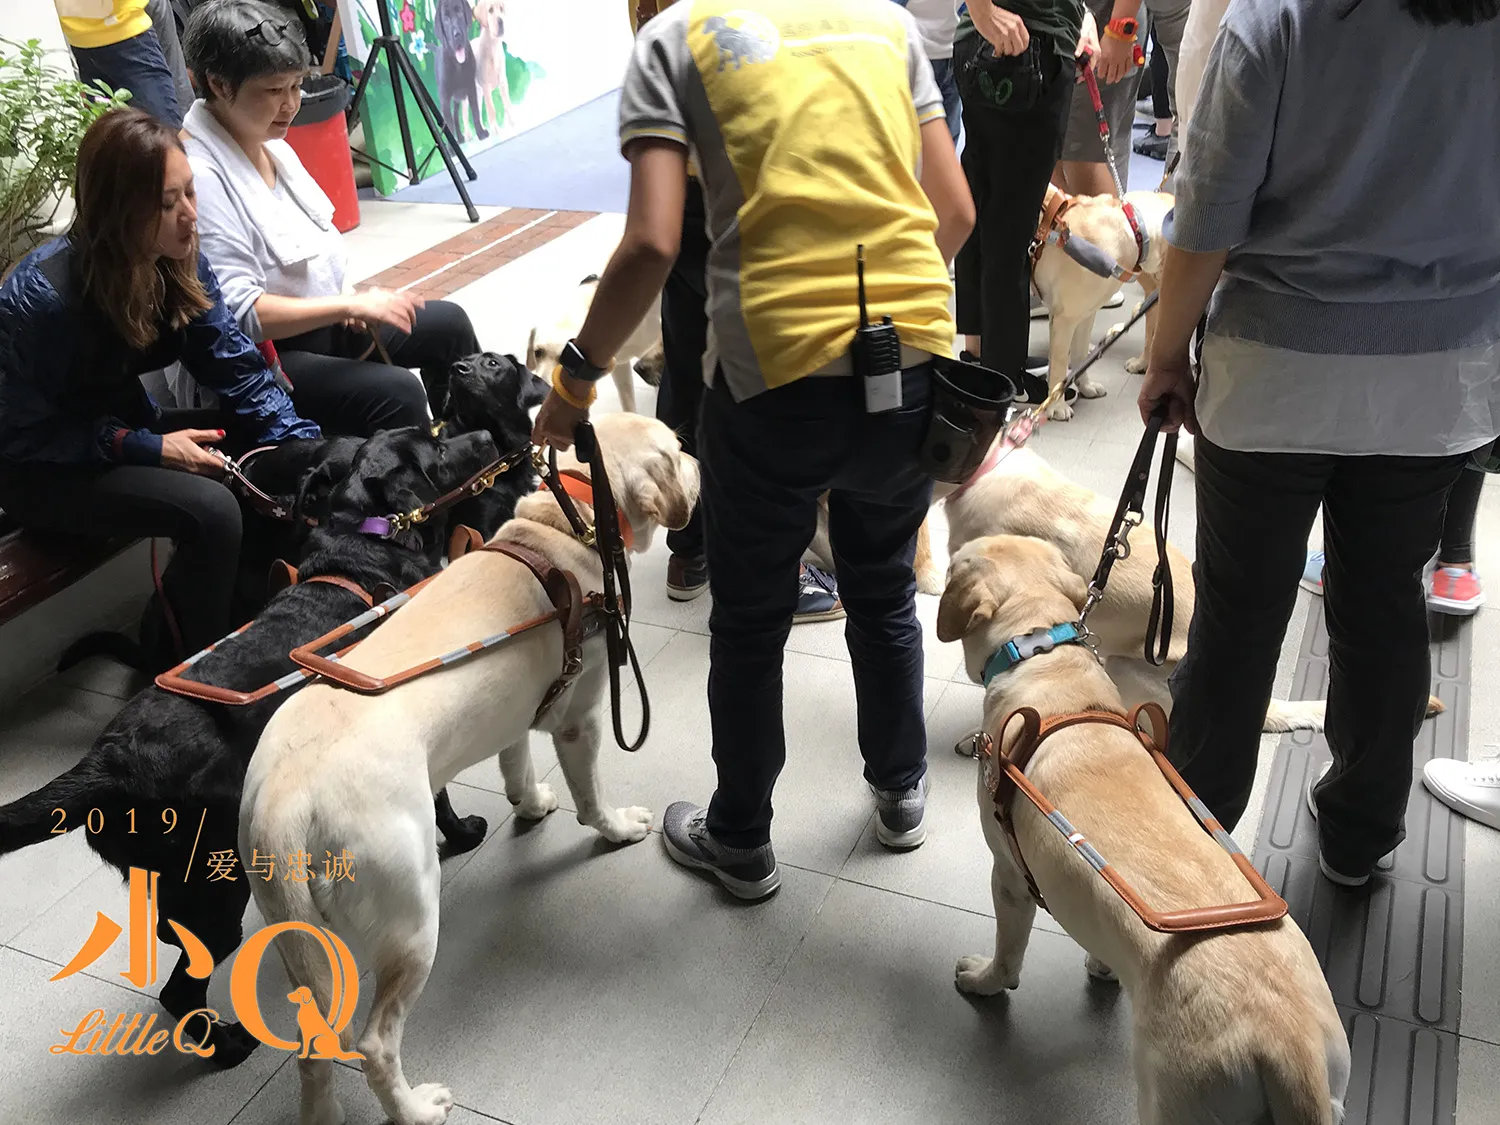 Half of guide dogs in Hong Kong gather. JPG